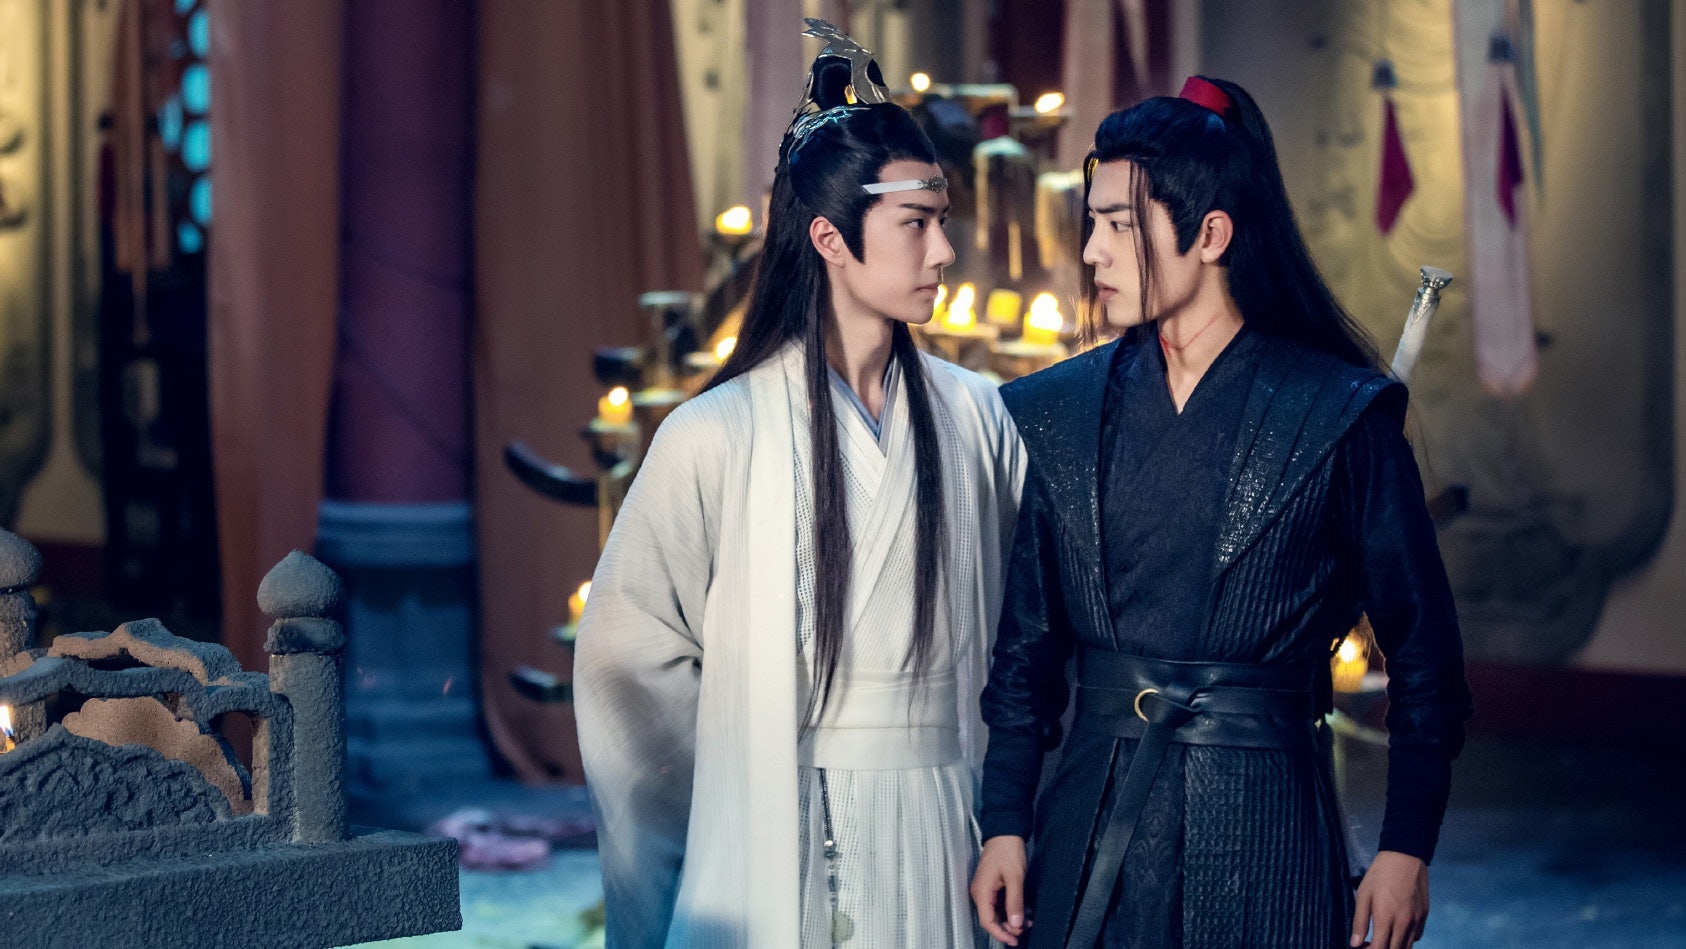 Despite China’s ban on the production of “Boys’ Love” (BL) dramas, the genre continues to pick up steam — at home and overseas. What’s behind the trend? Photo: The Untamed, Tencent Penguin Pictures